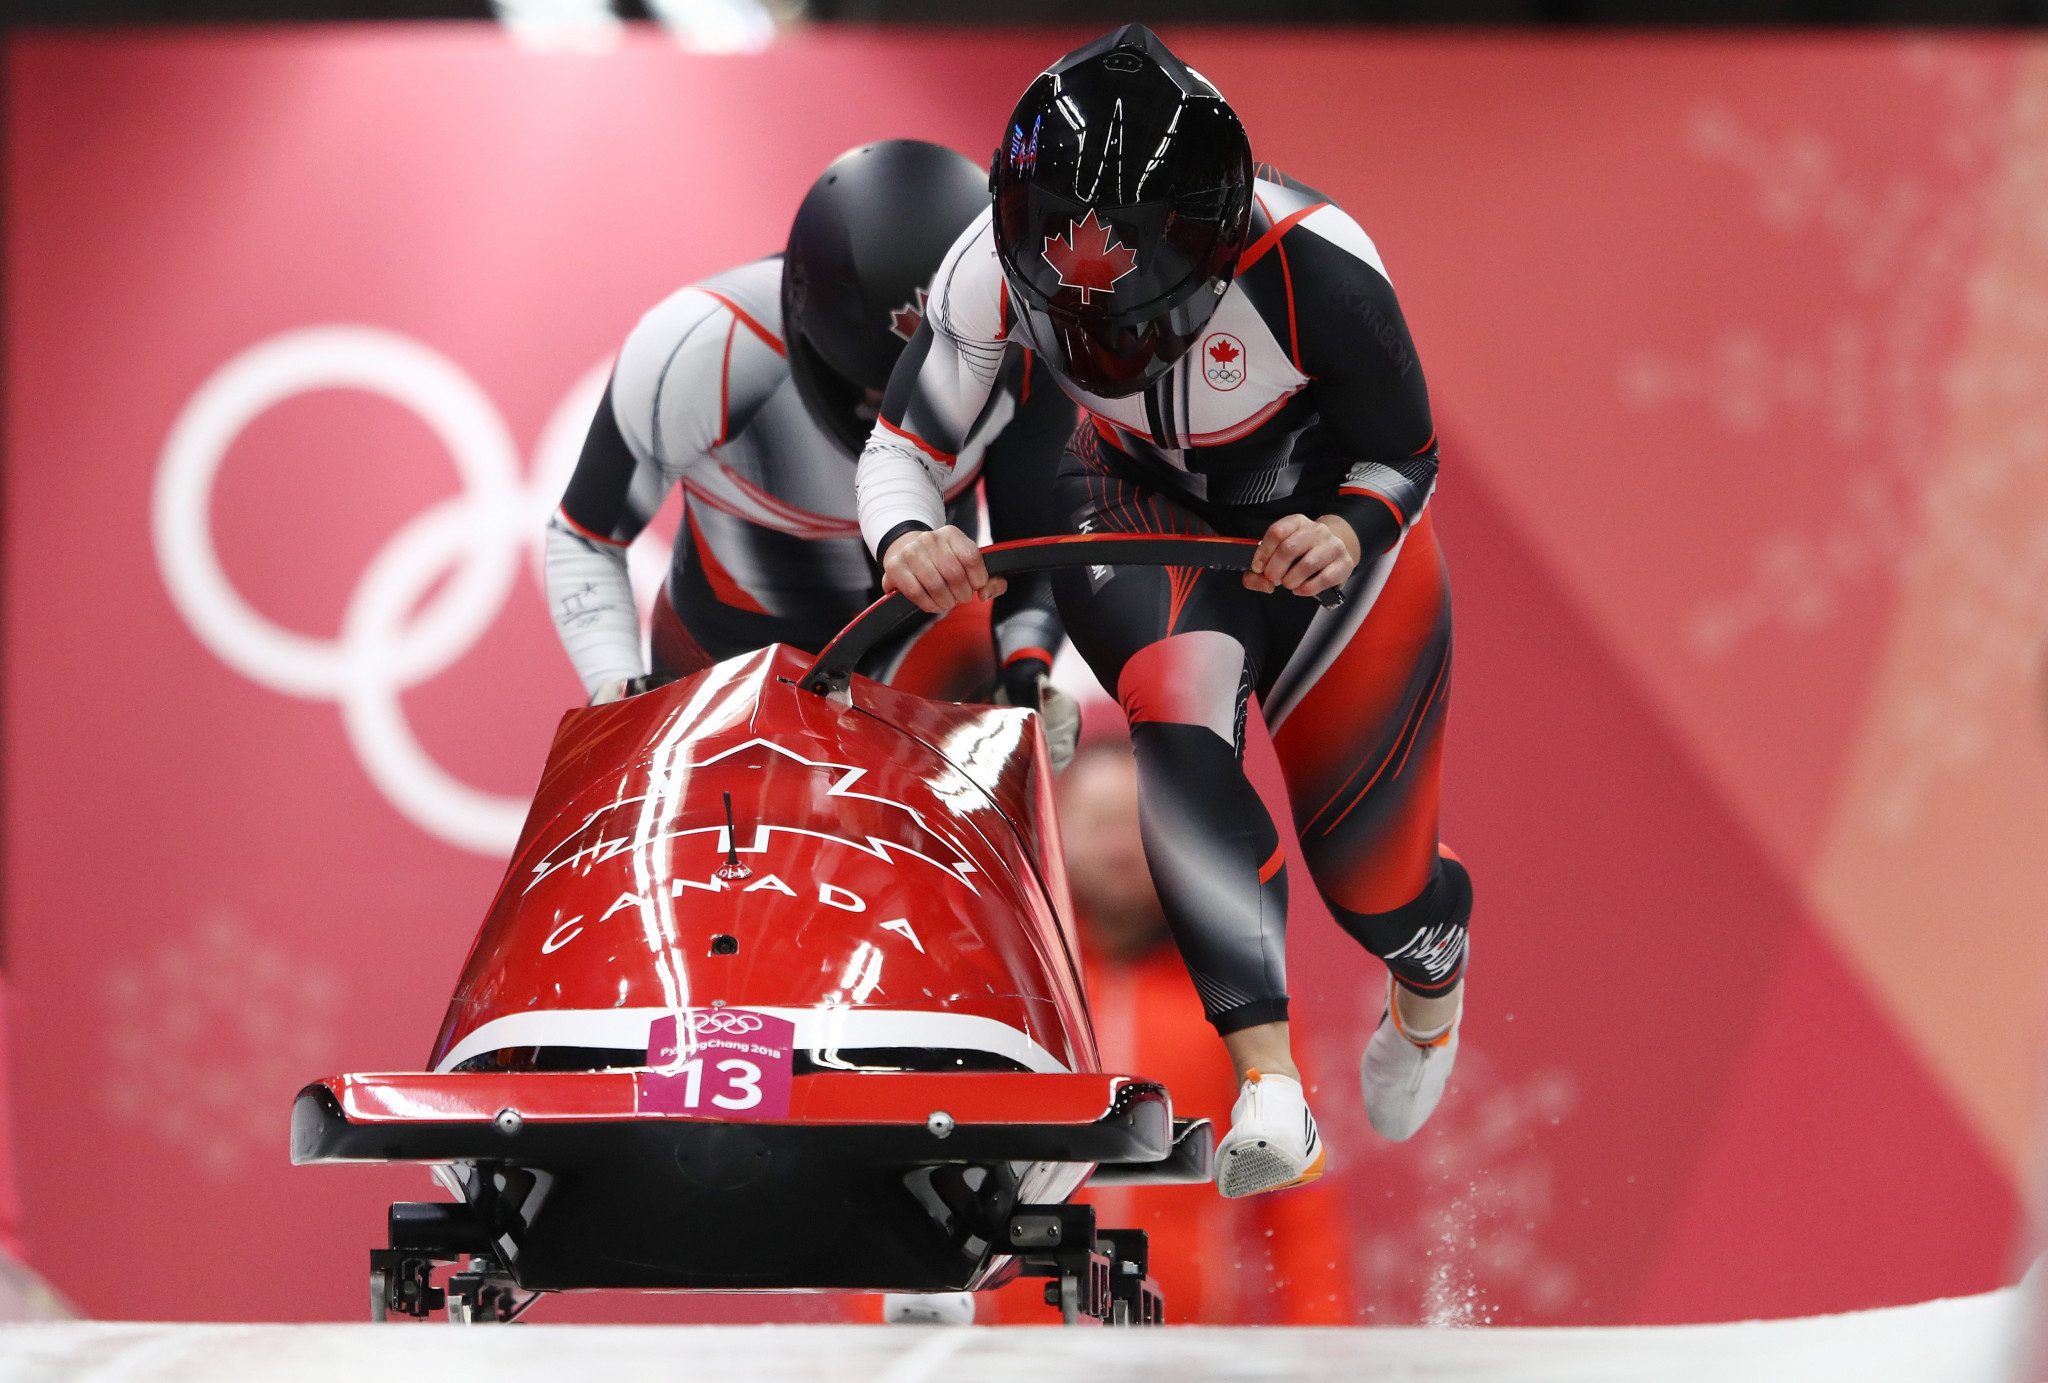 Melissa Lotholz was a brakewoman as part of a partnership with Christine de Bruin at Pyeongchang 2018 ©Getty Images